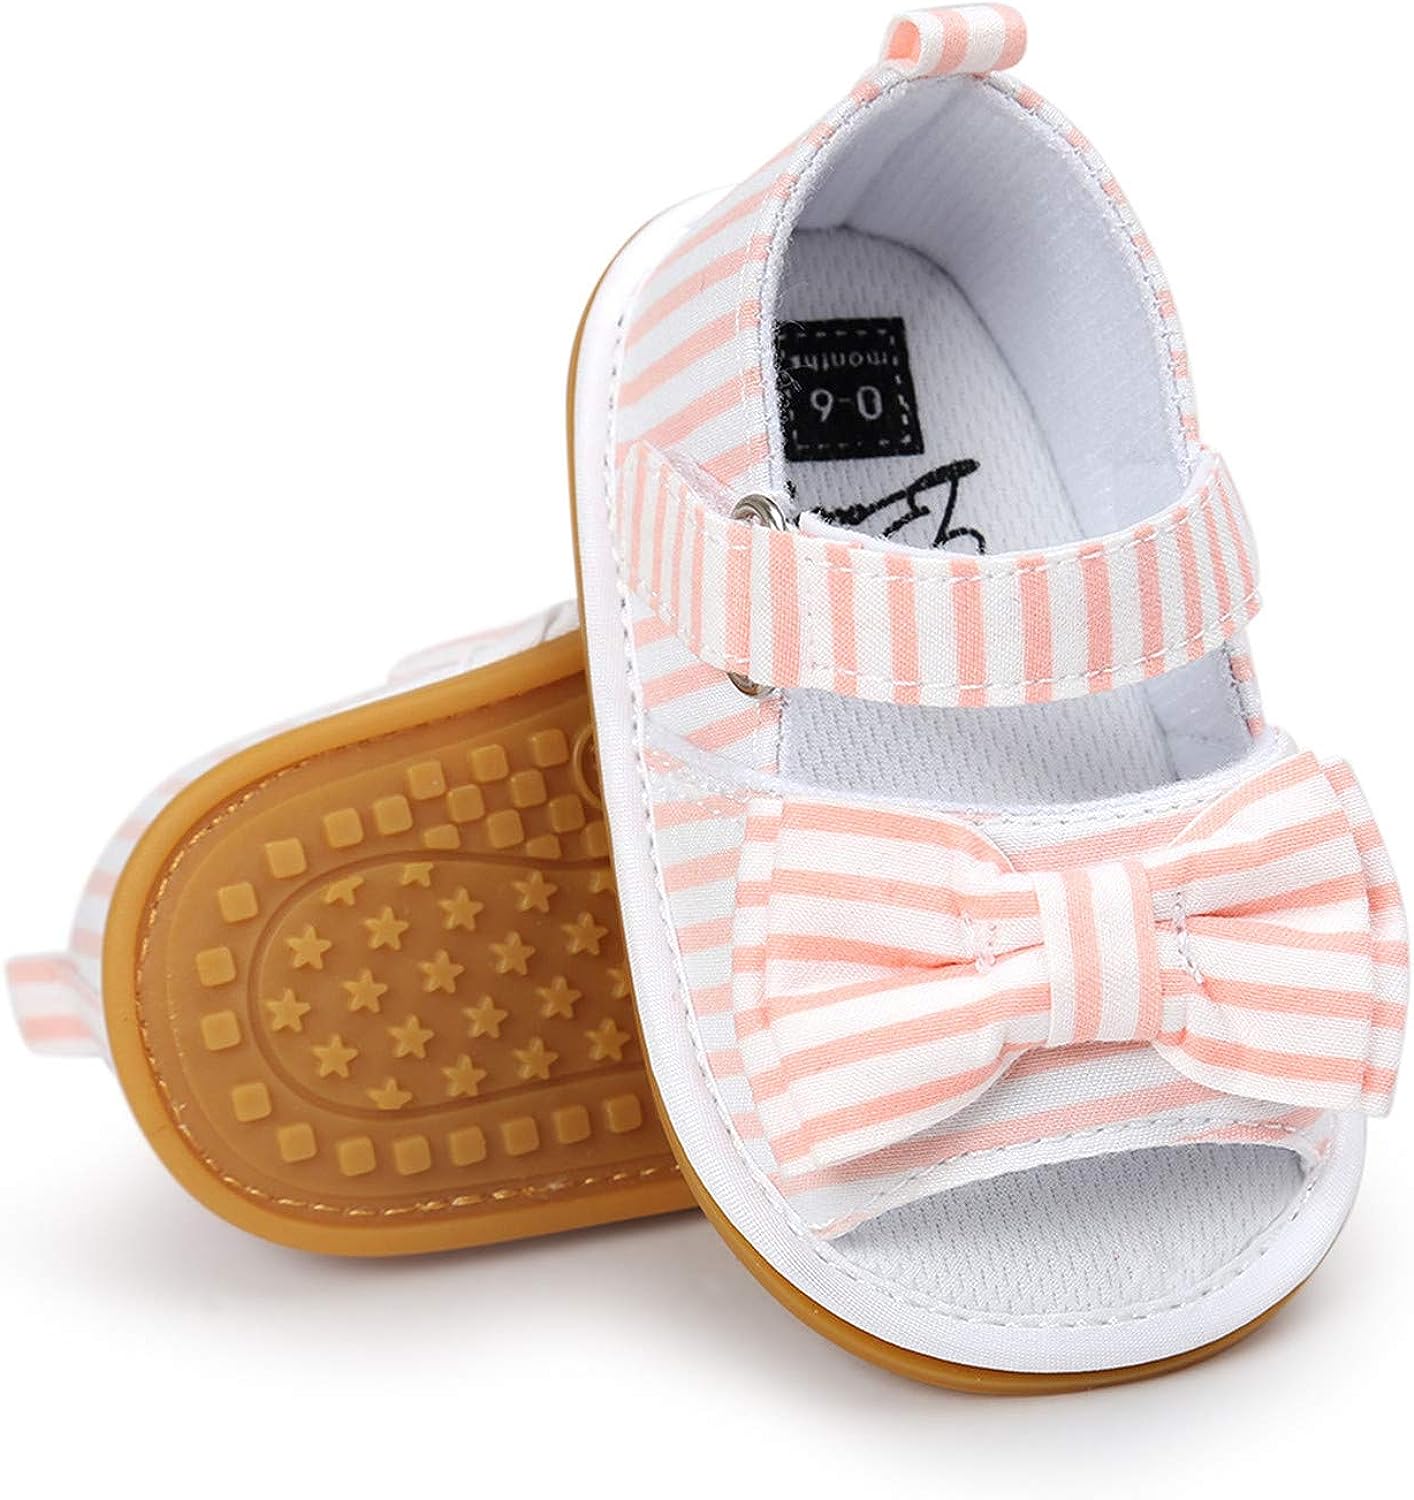 Baby Boys Girls Sandals Rubber Sole Outdoor First [...]